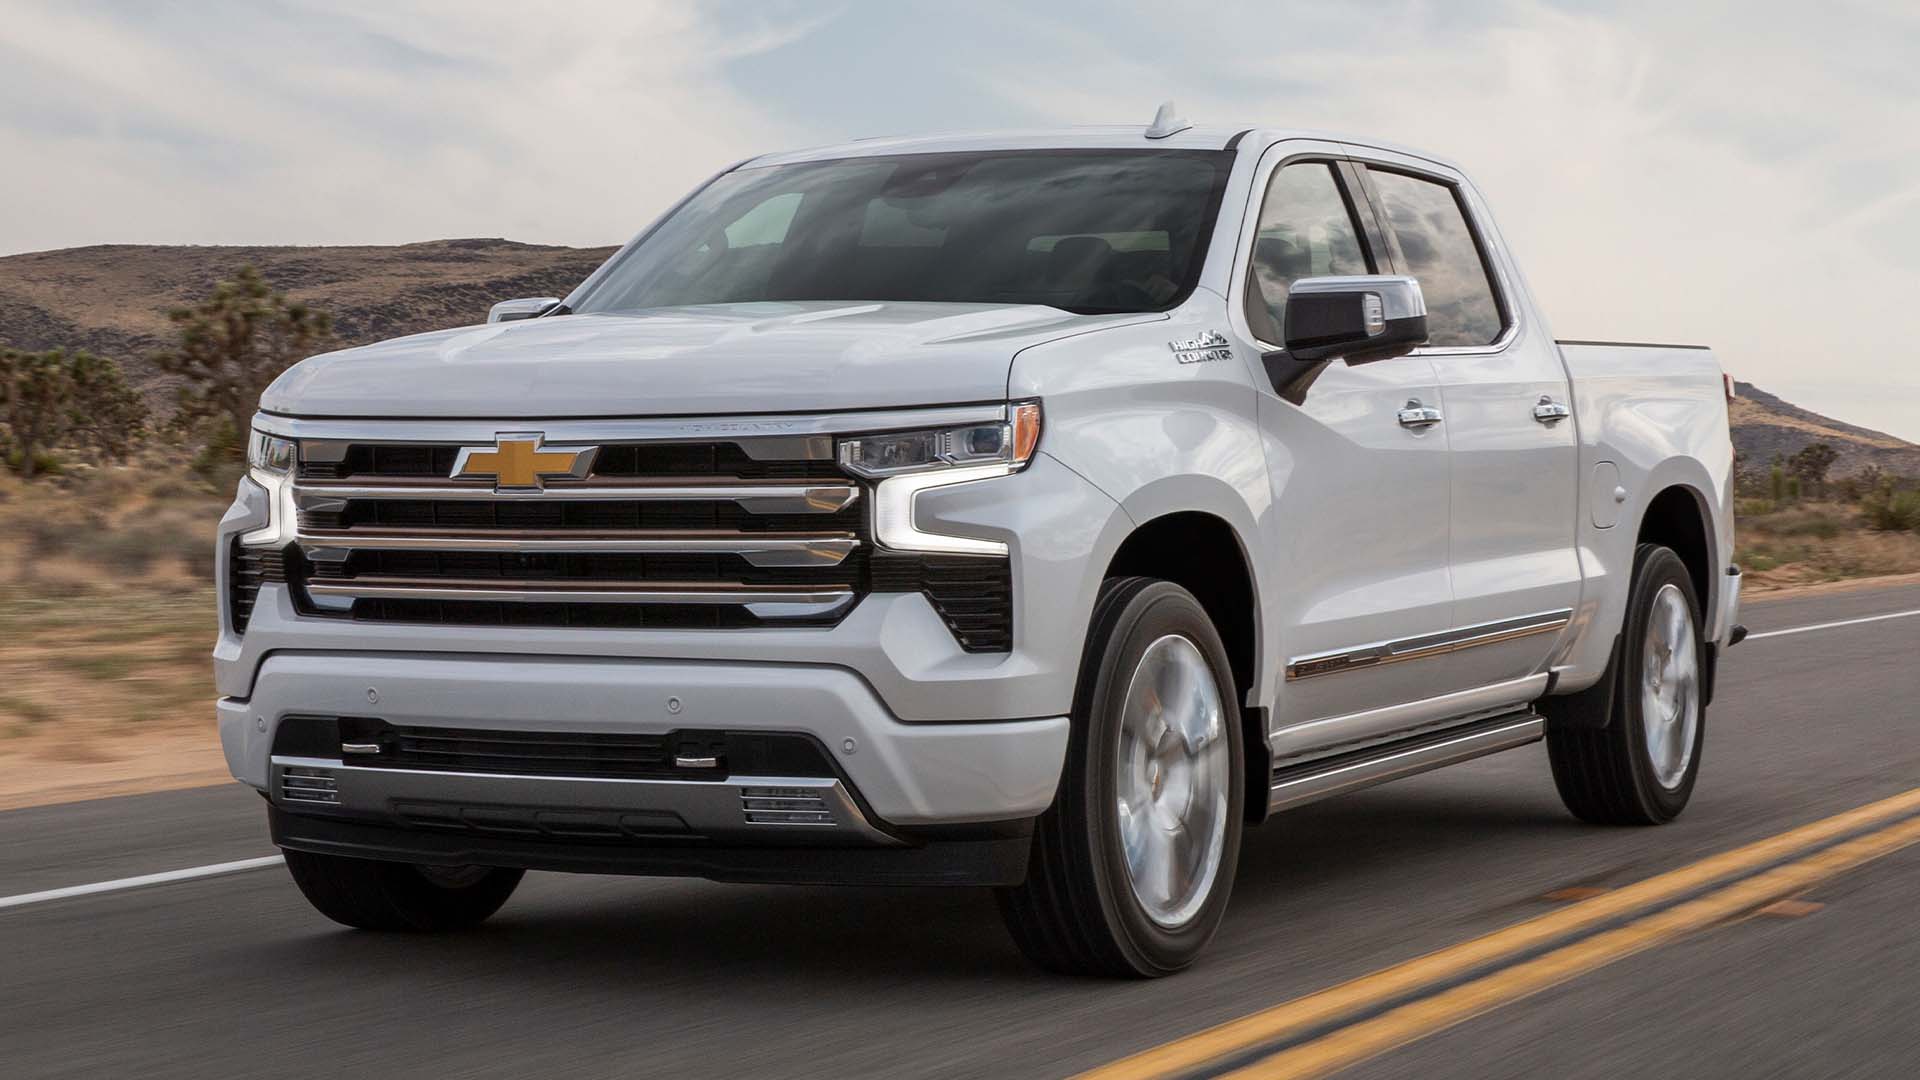 The 2023 Chevy Silverado driving on a country road